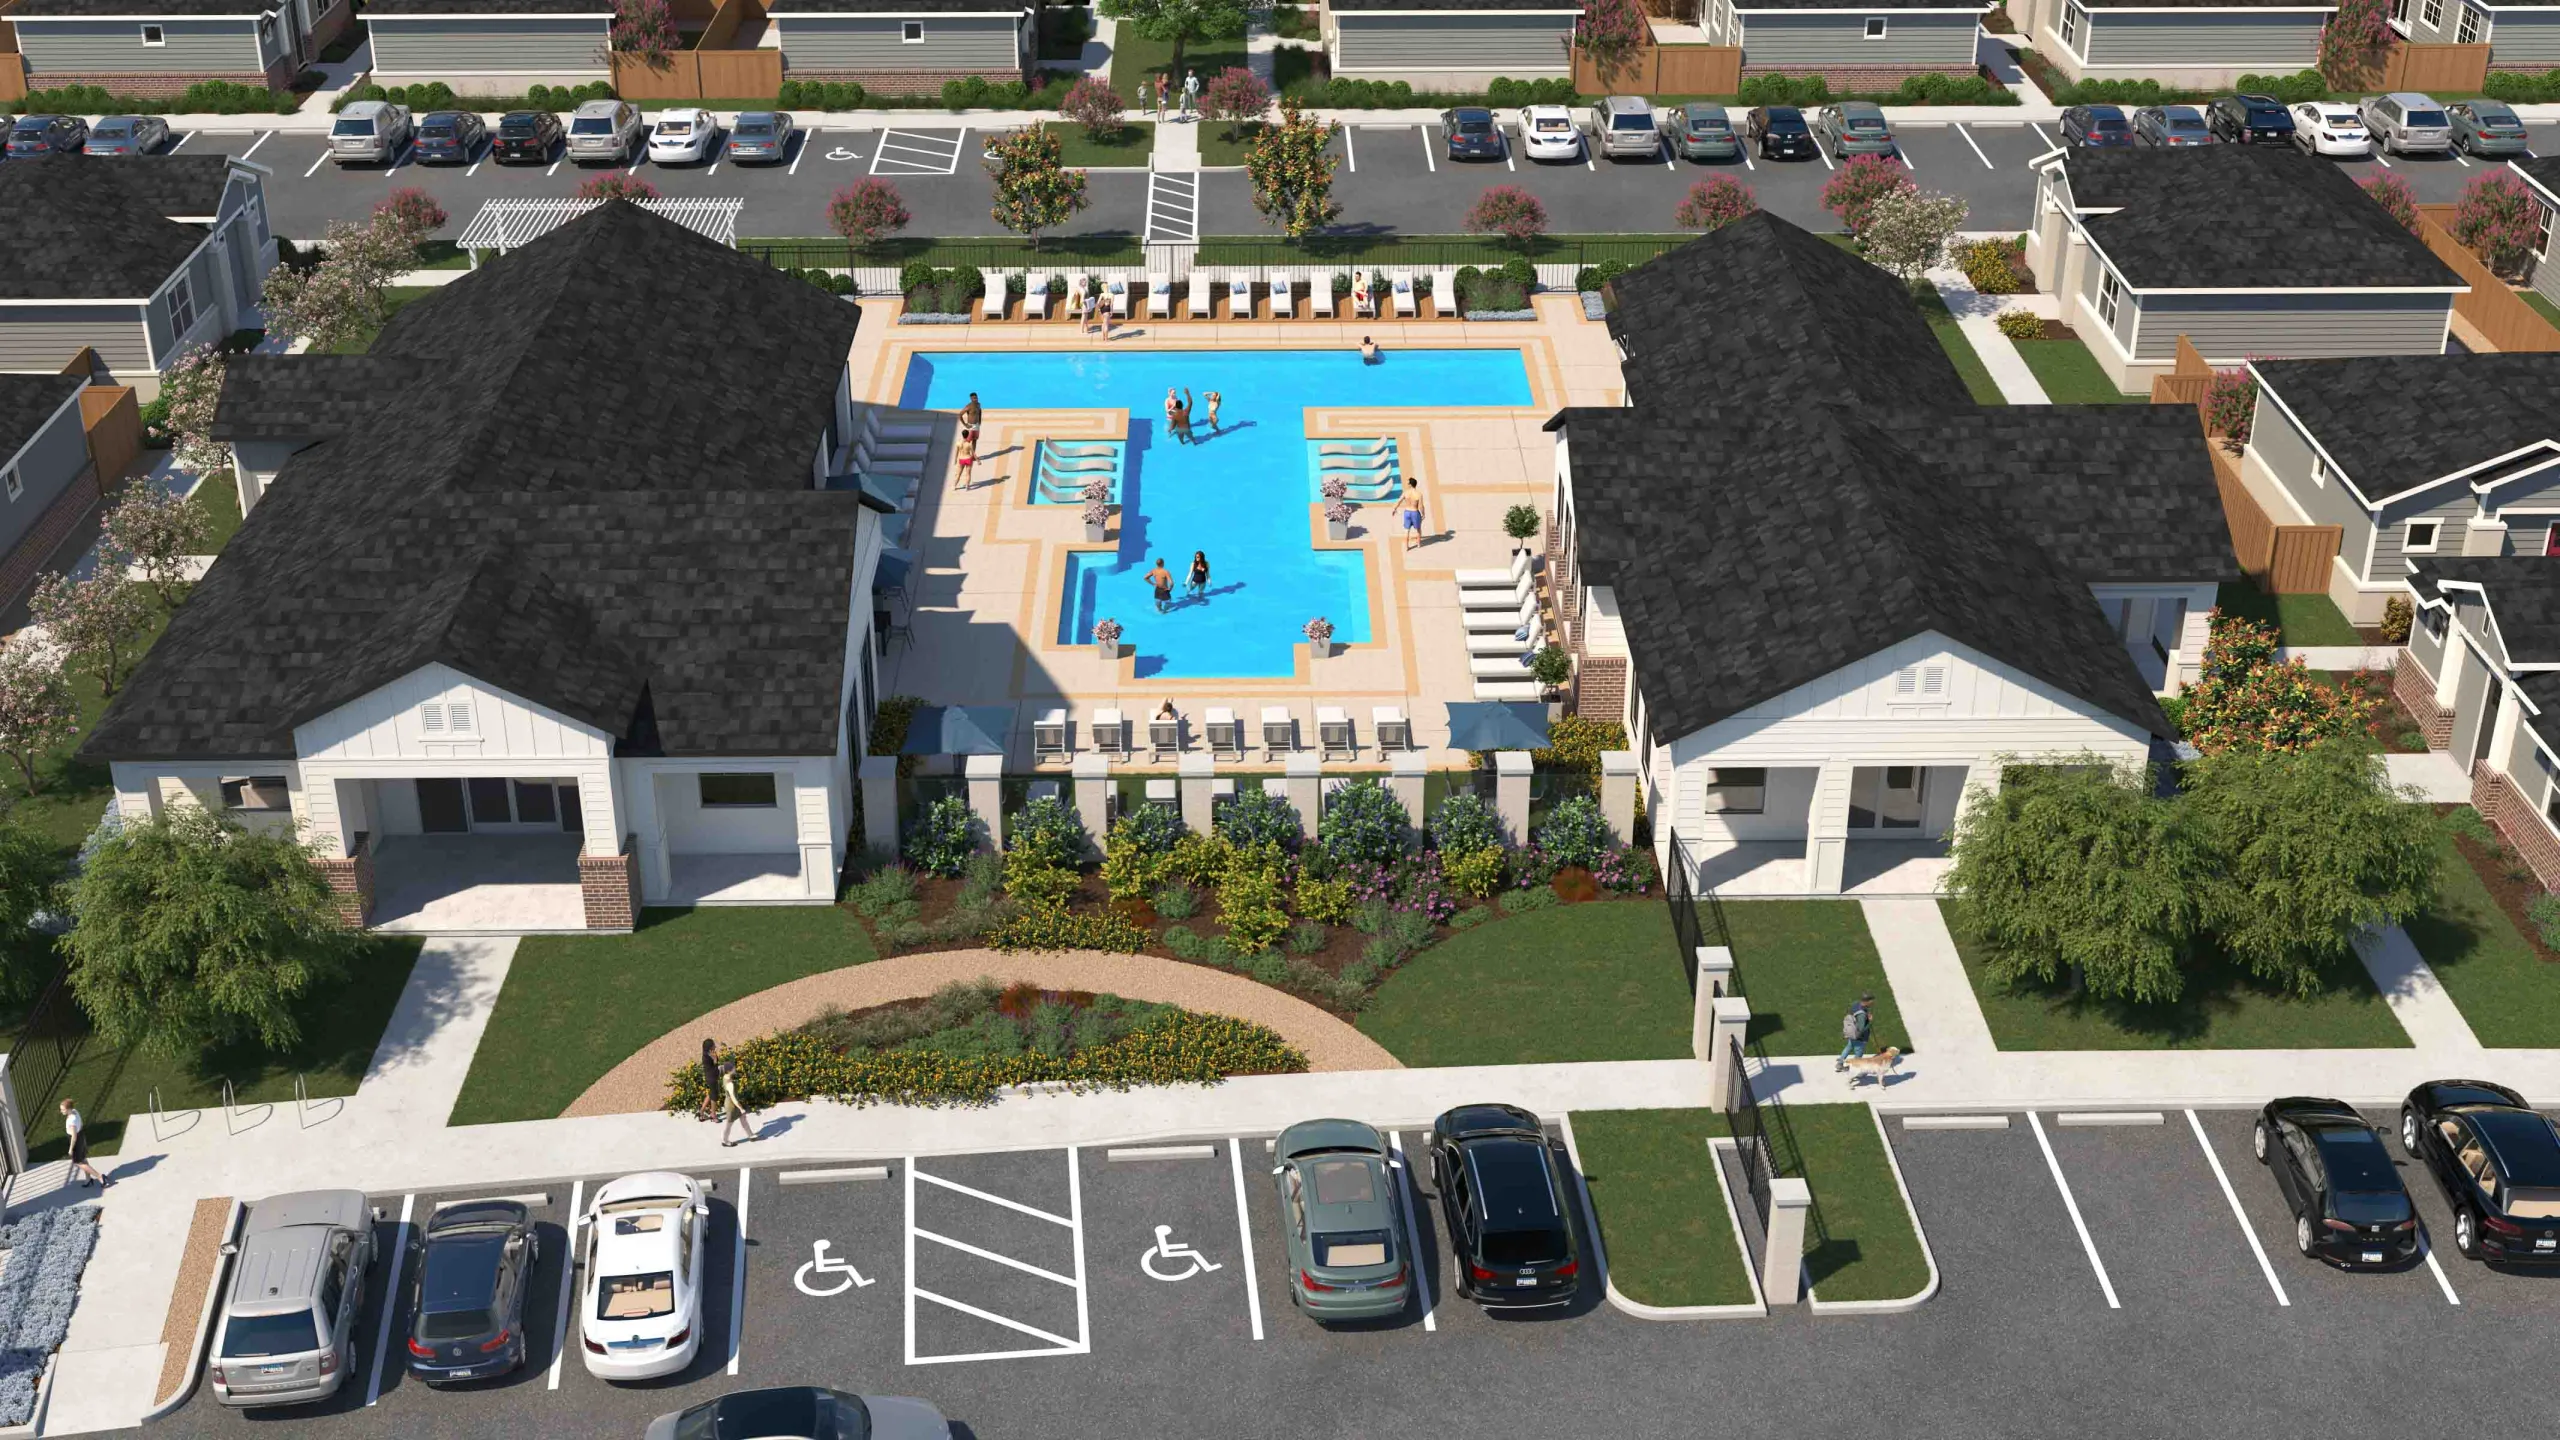 Arial amenity rendering of pool, clubhouse, and fitness center at Yardly Cypress. Leasing office is also in rendering where guests can meet staff and tour new rental homes with private fenced backyards.